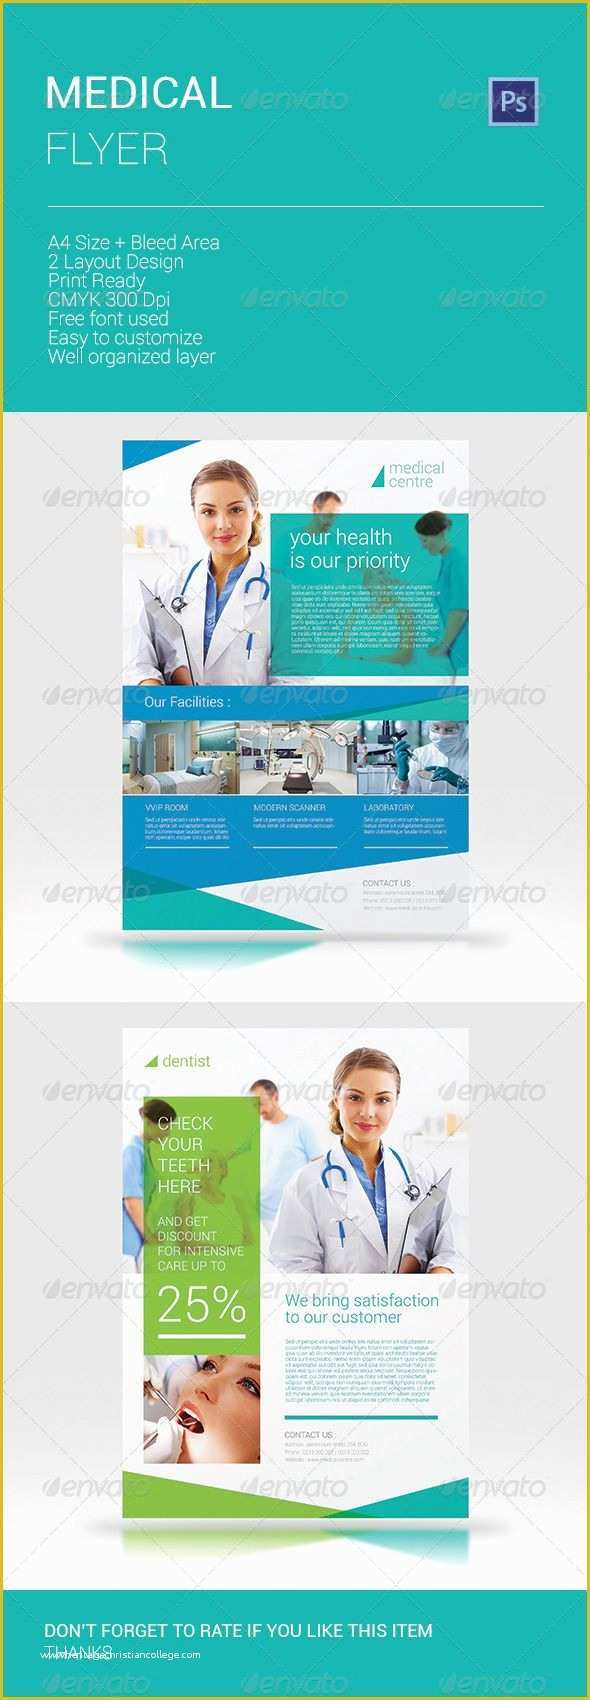 Healthcare Brochure Templates Free Download Of 40 Best top Pharmacy Brochure Designs Images On Pinterest